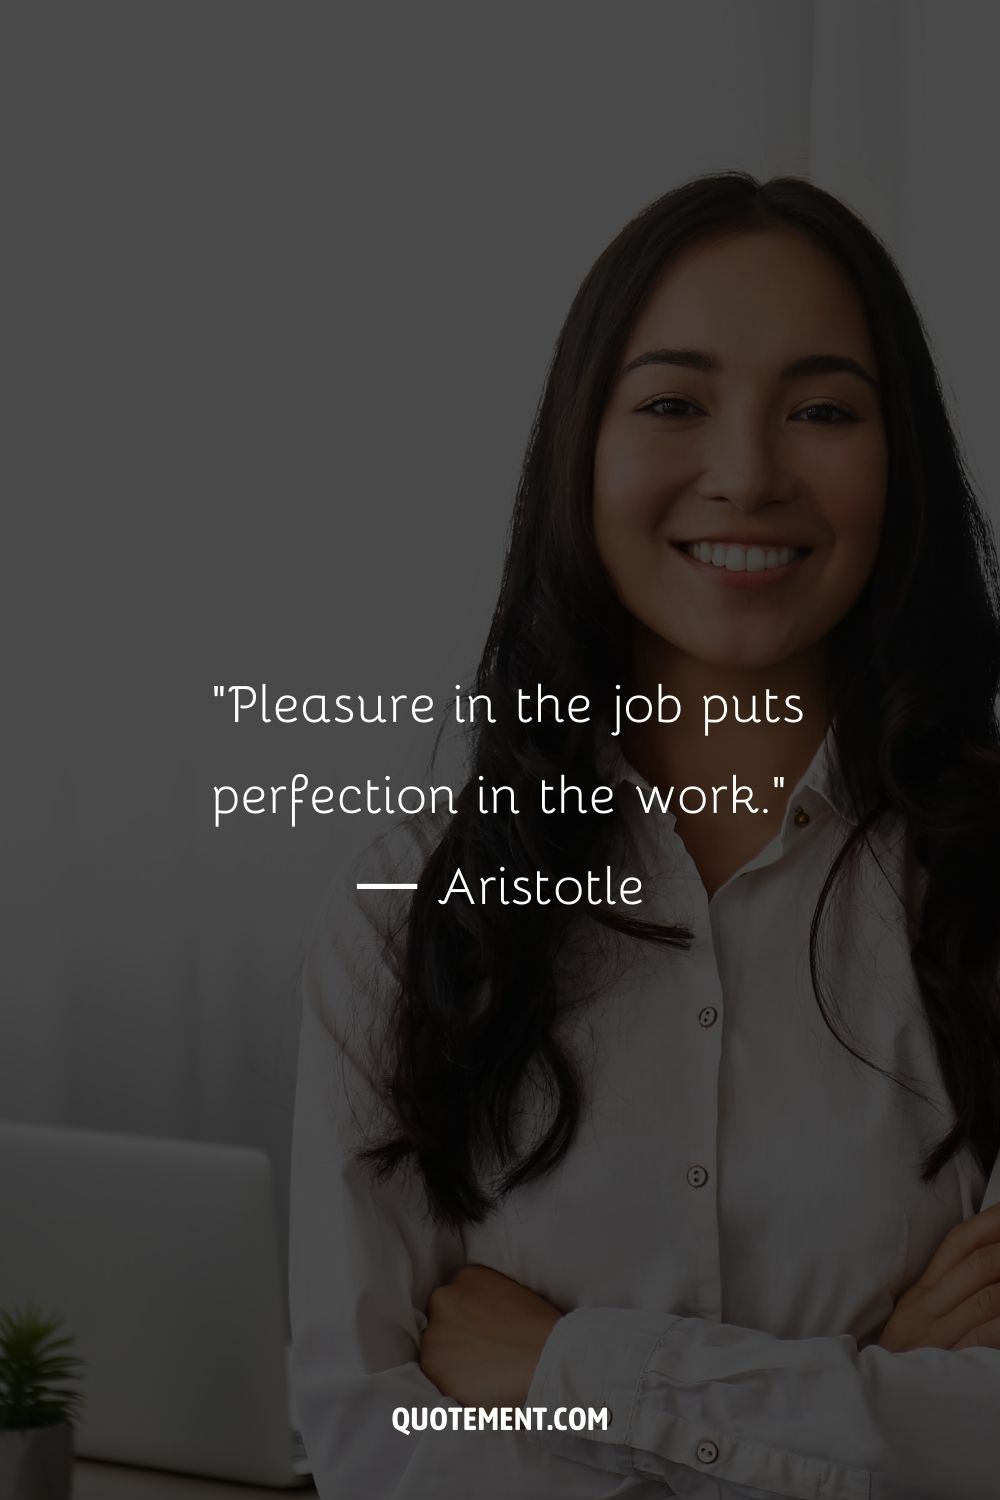 “Pleasure in the job puts perfection in the work.” ― Aristotle